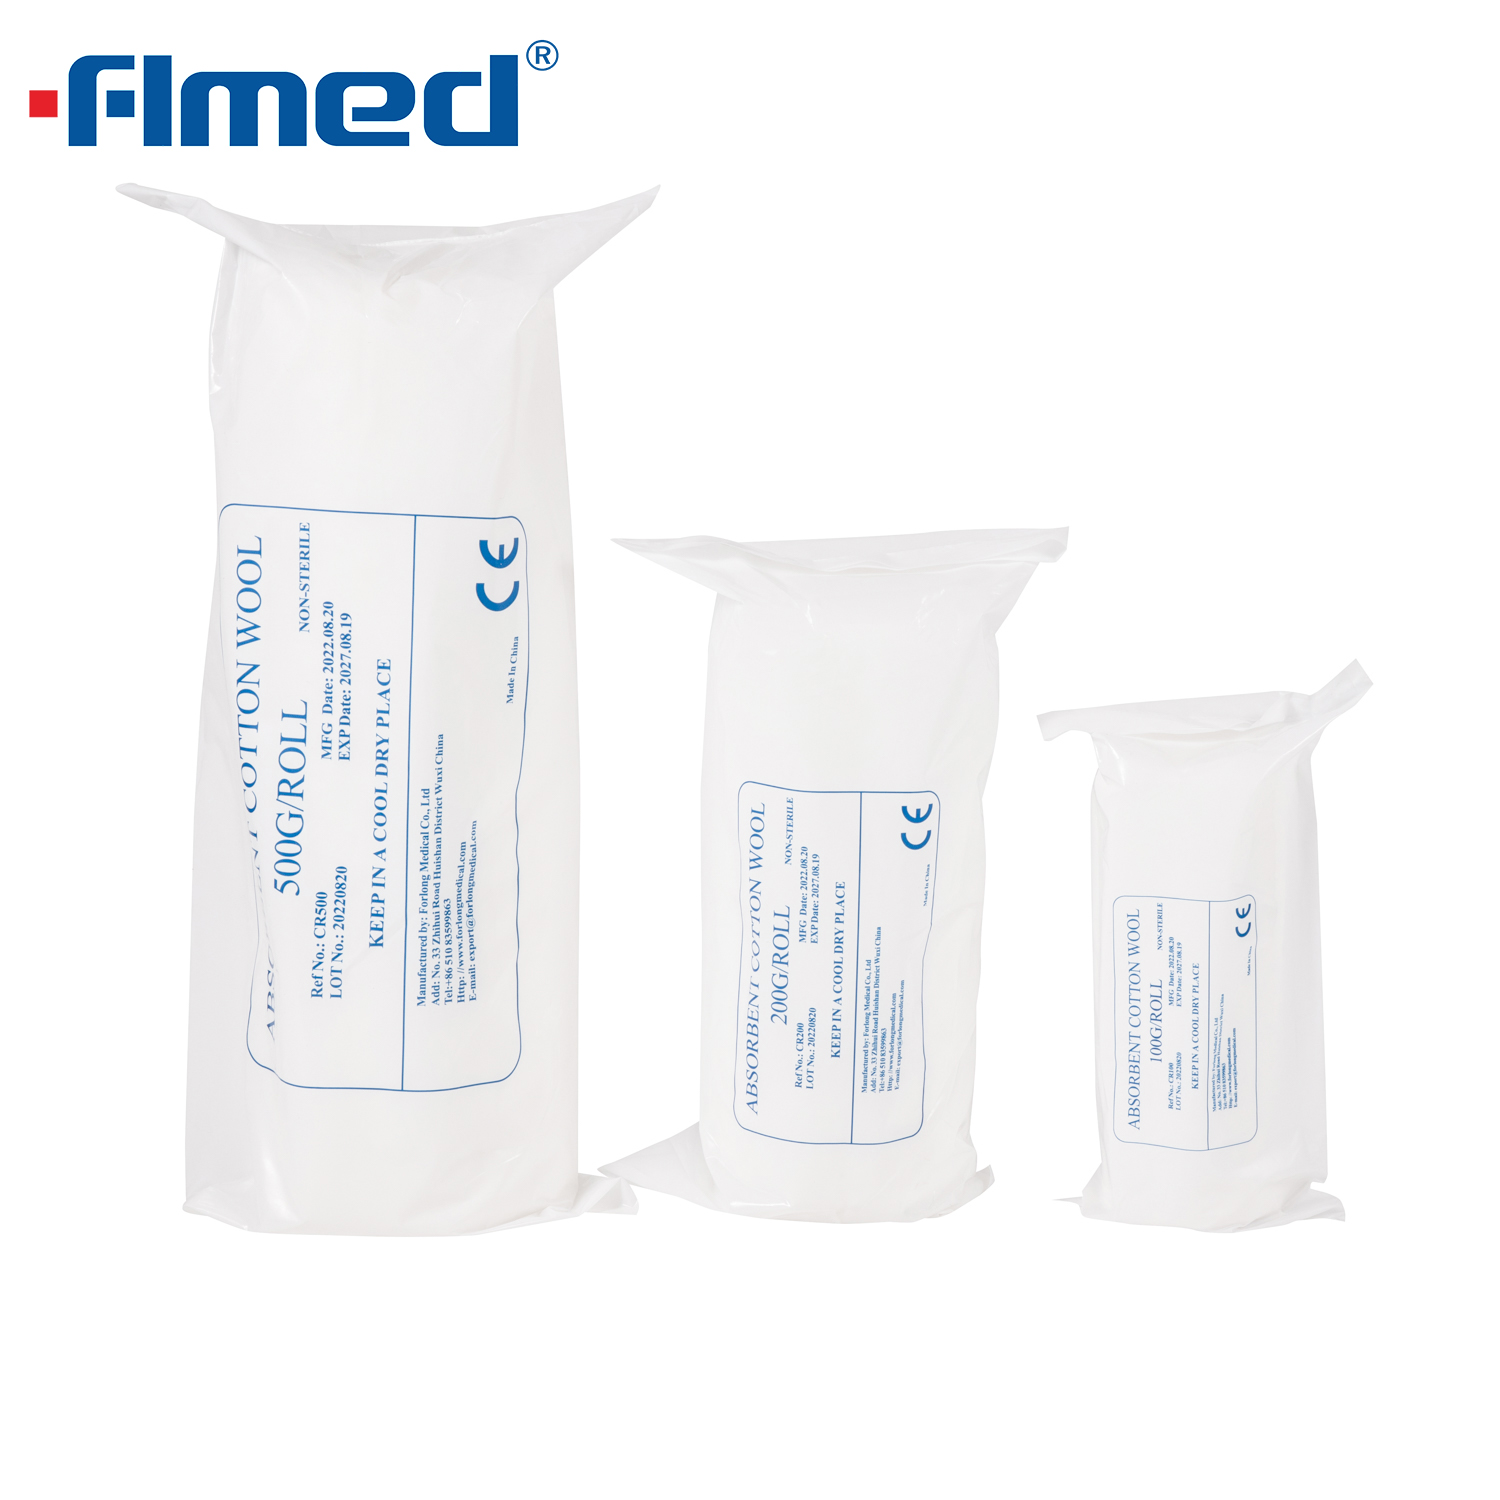 Cotton Wool Roll 500g for Medical Use